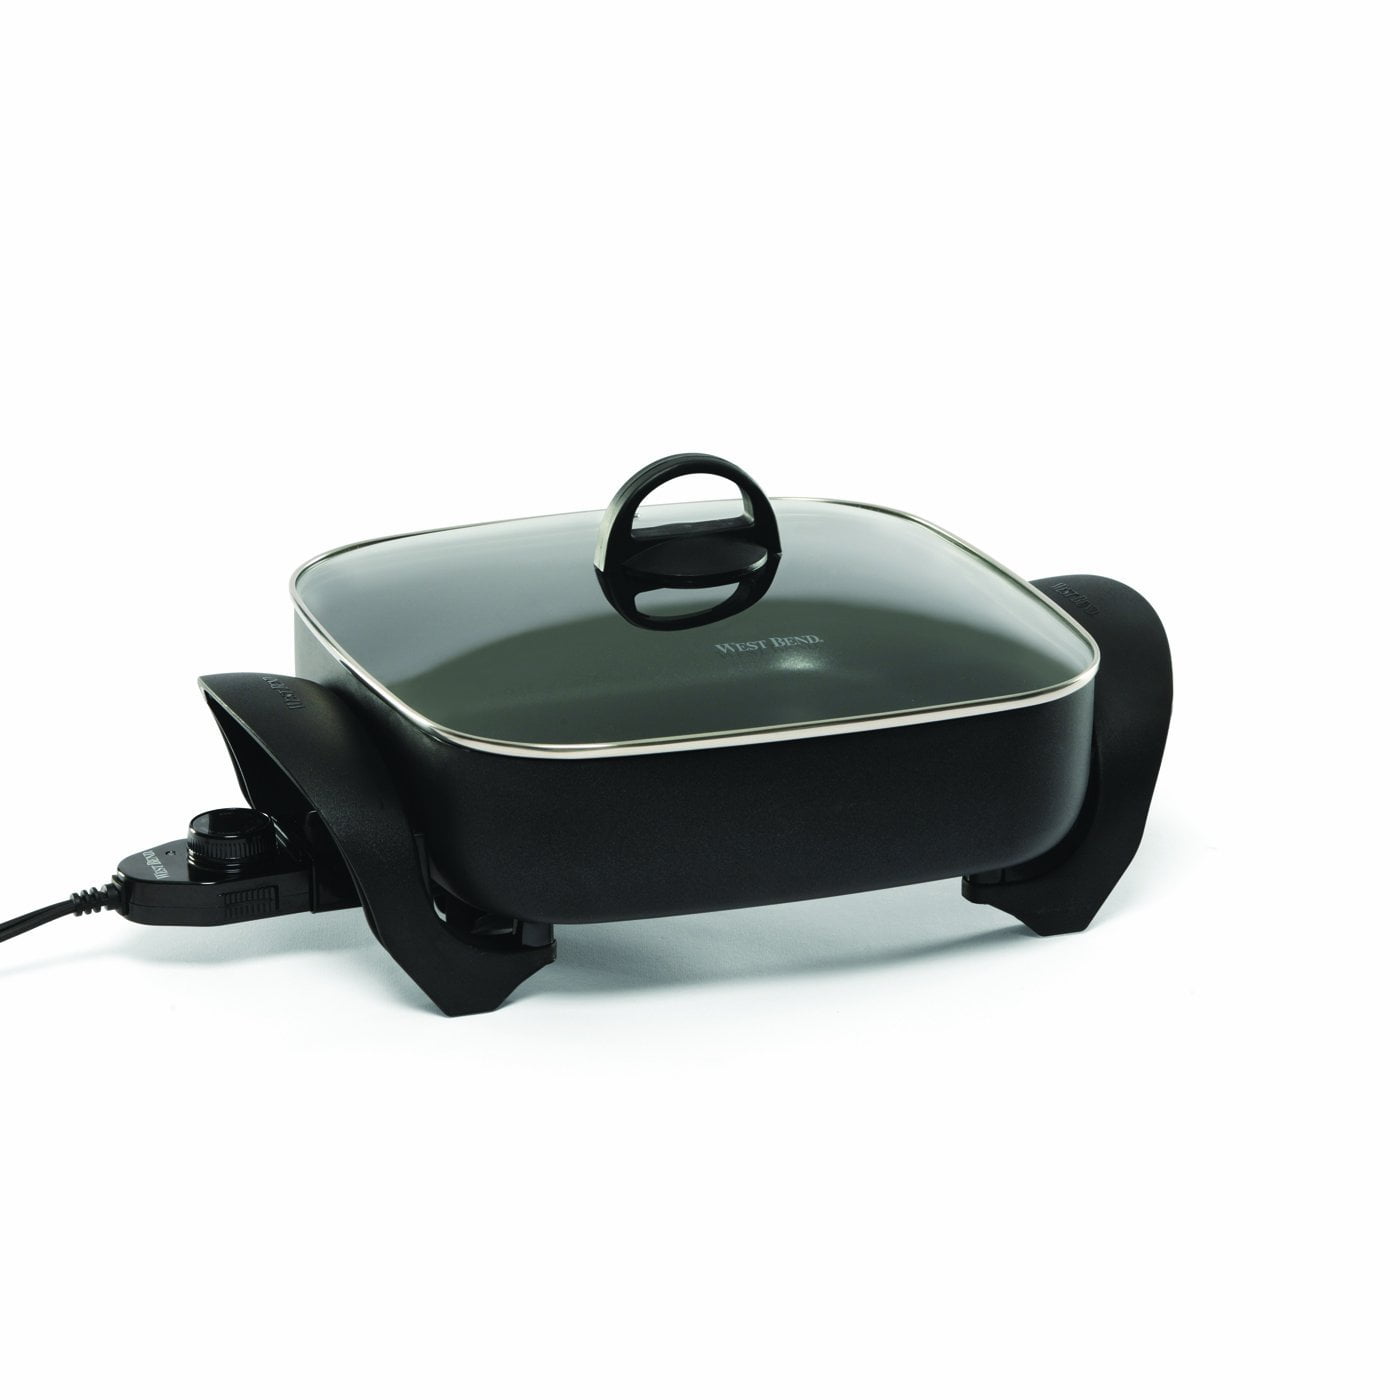 West Bend 12-Inch Family-Sized Electric Skillet with Diamond